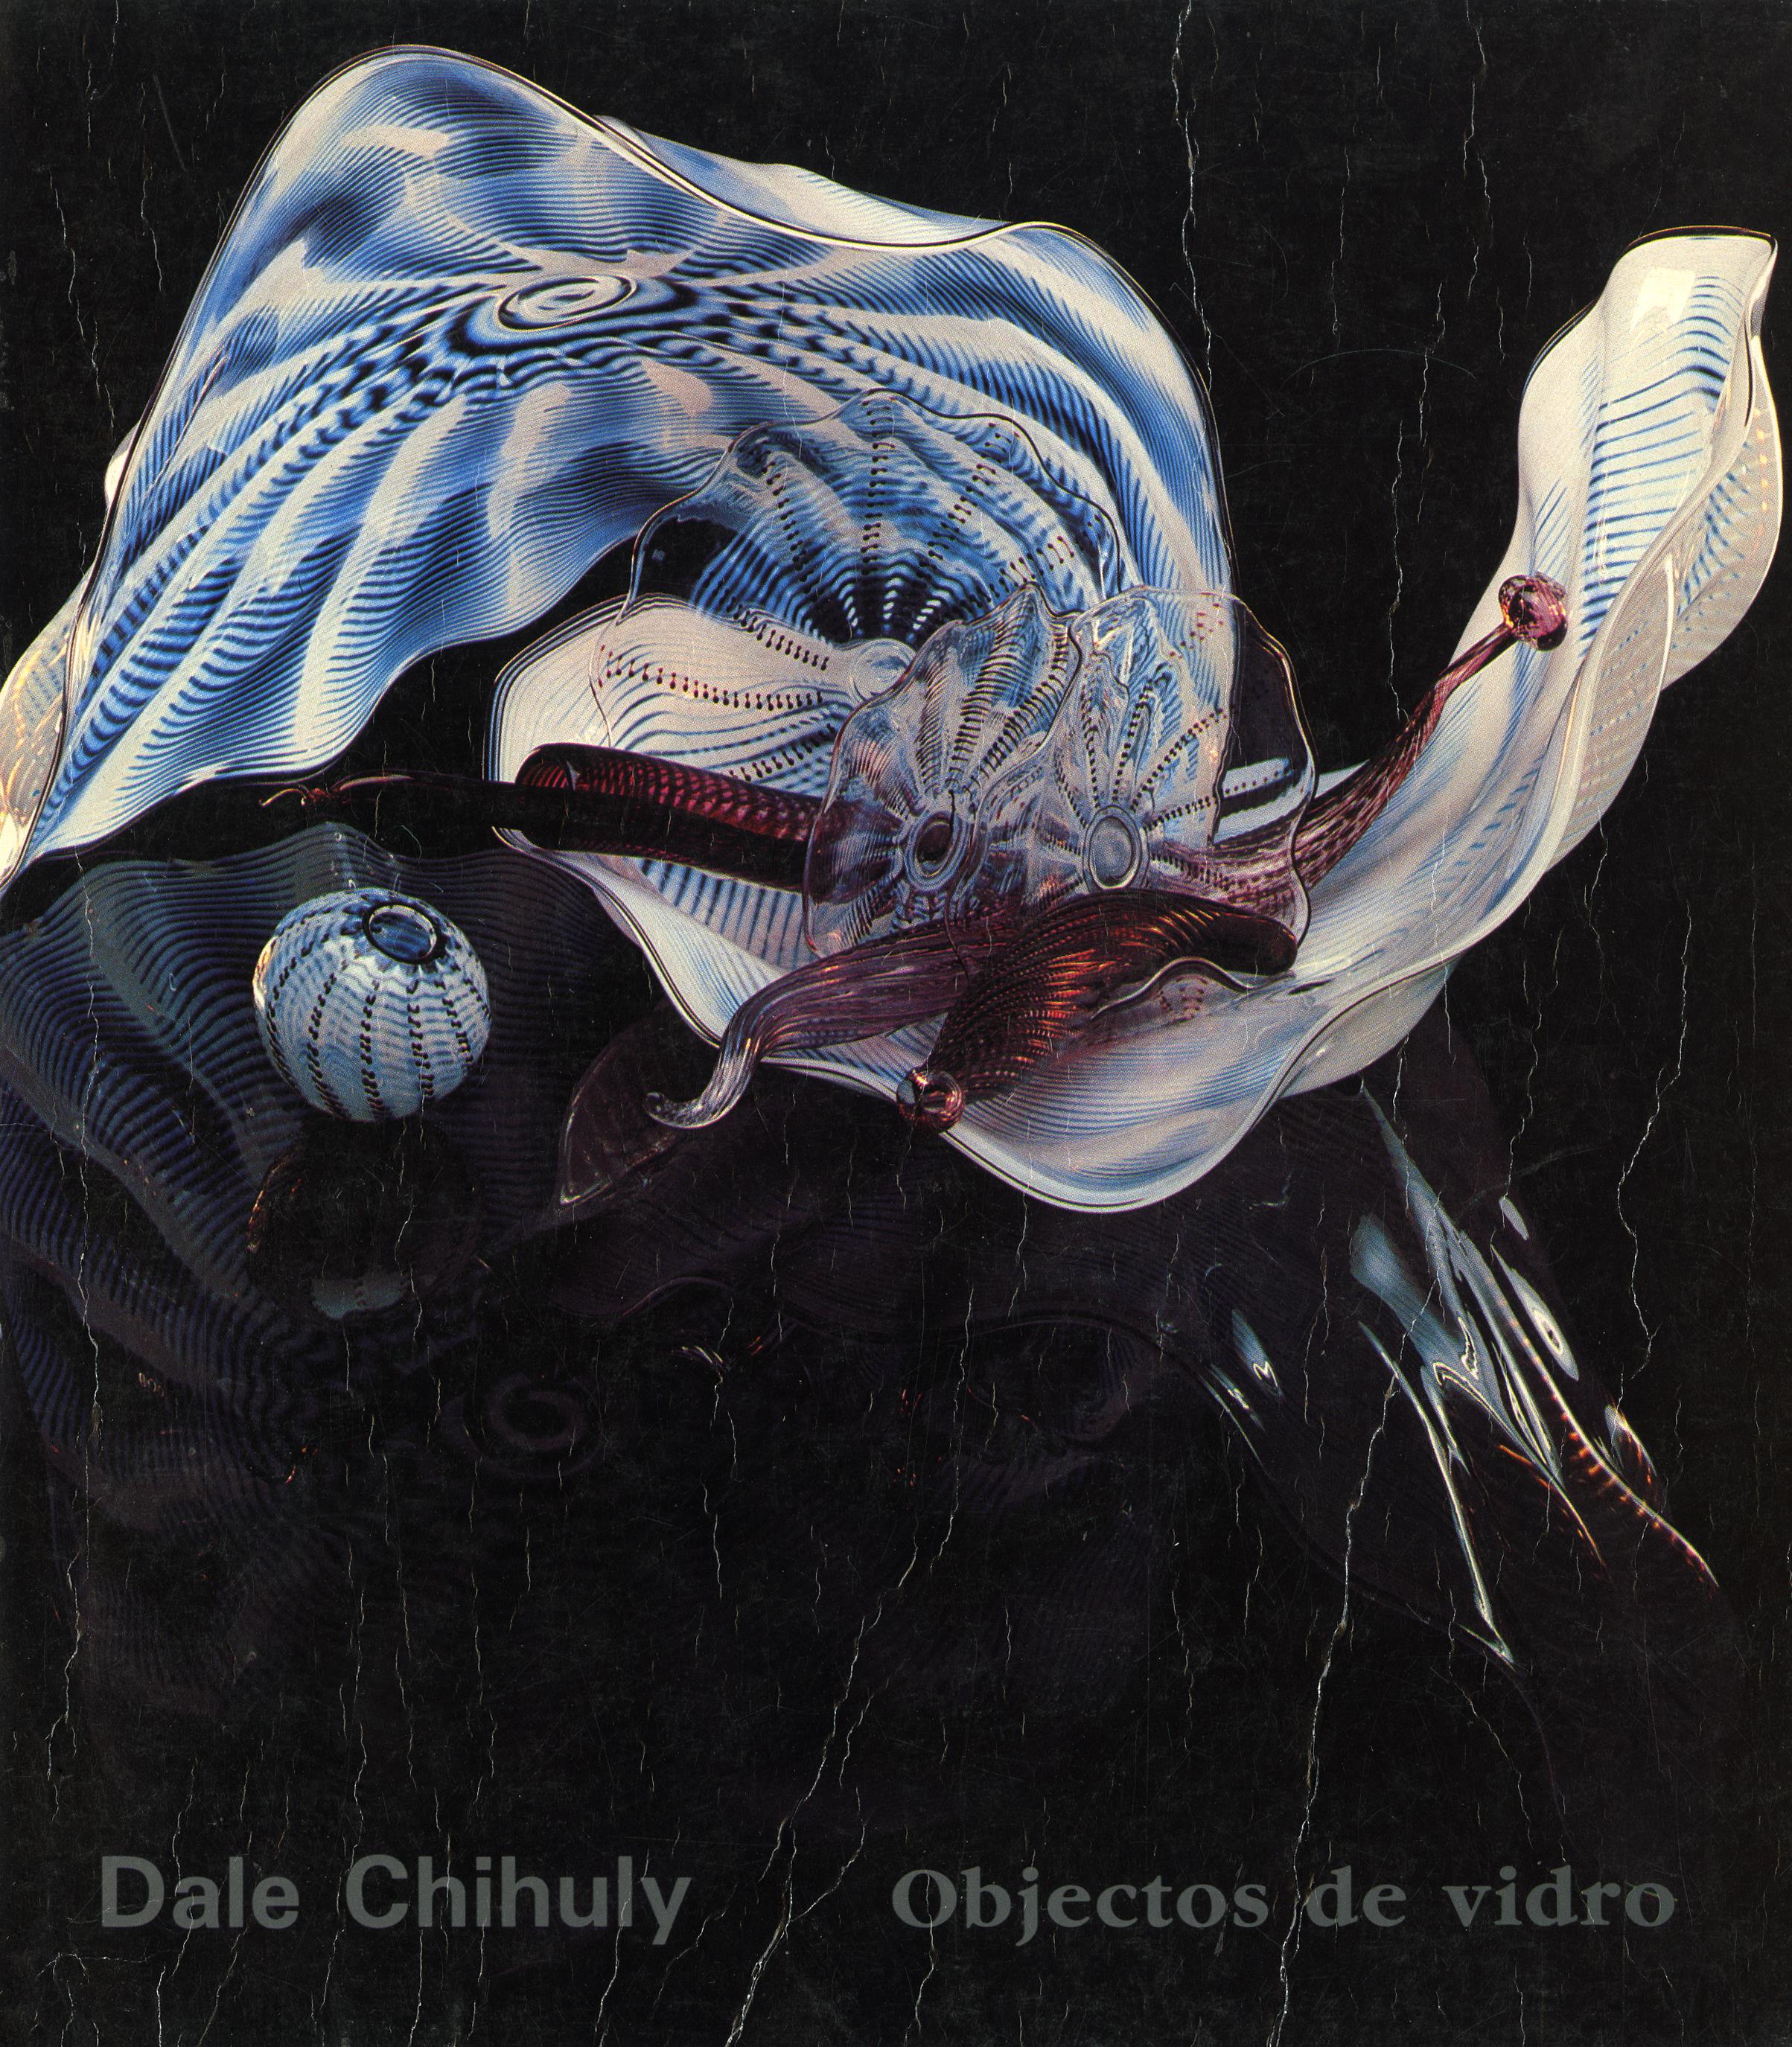 Dale Chihuly. Objectos de Vidro